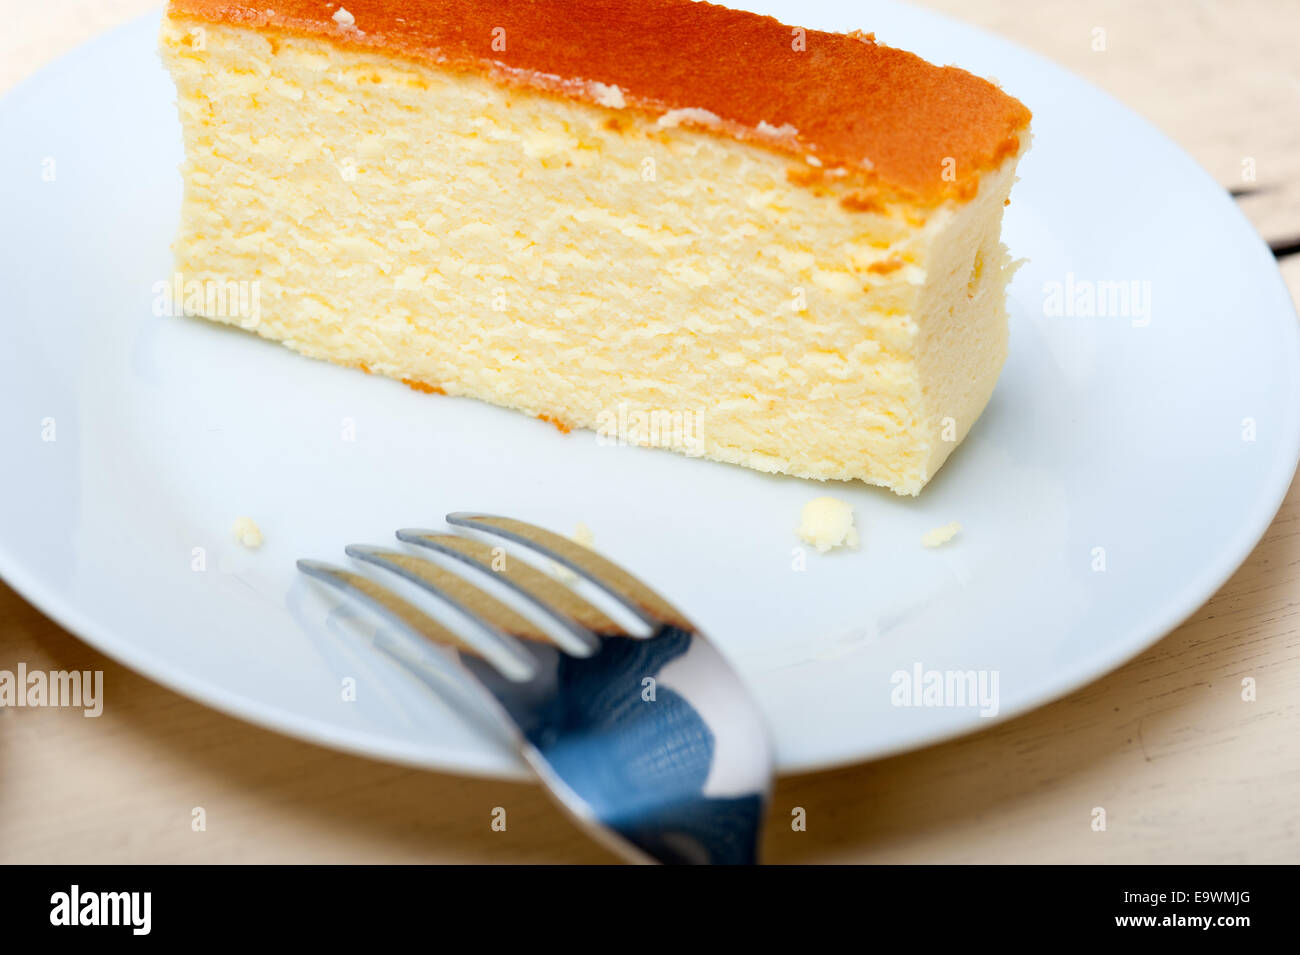 fresh made cheese cake over white wood table Stock Photo